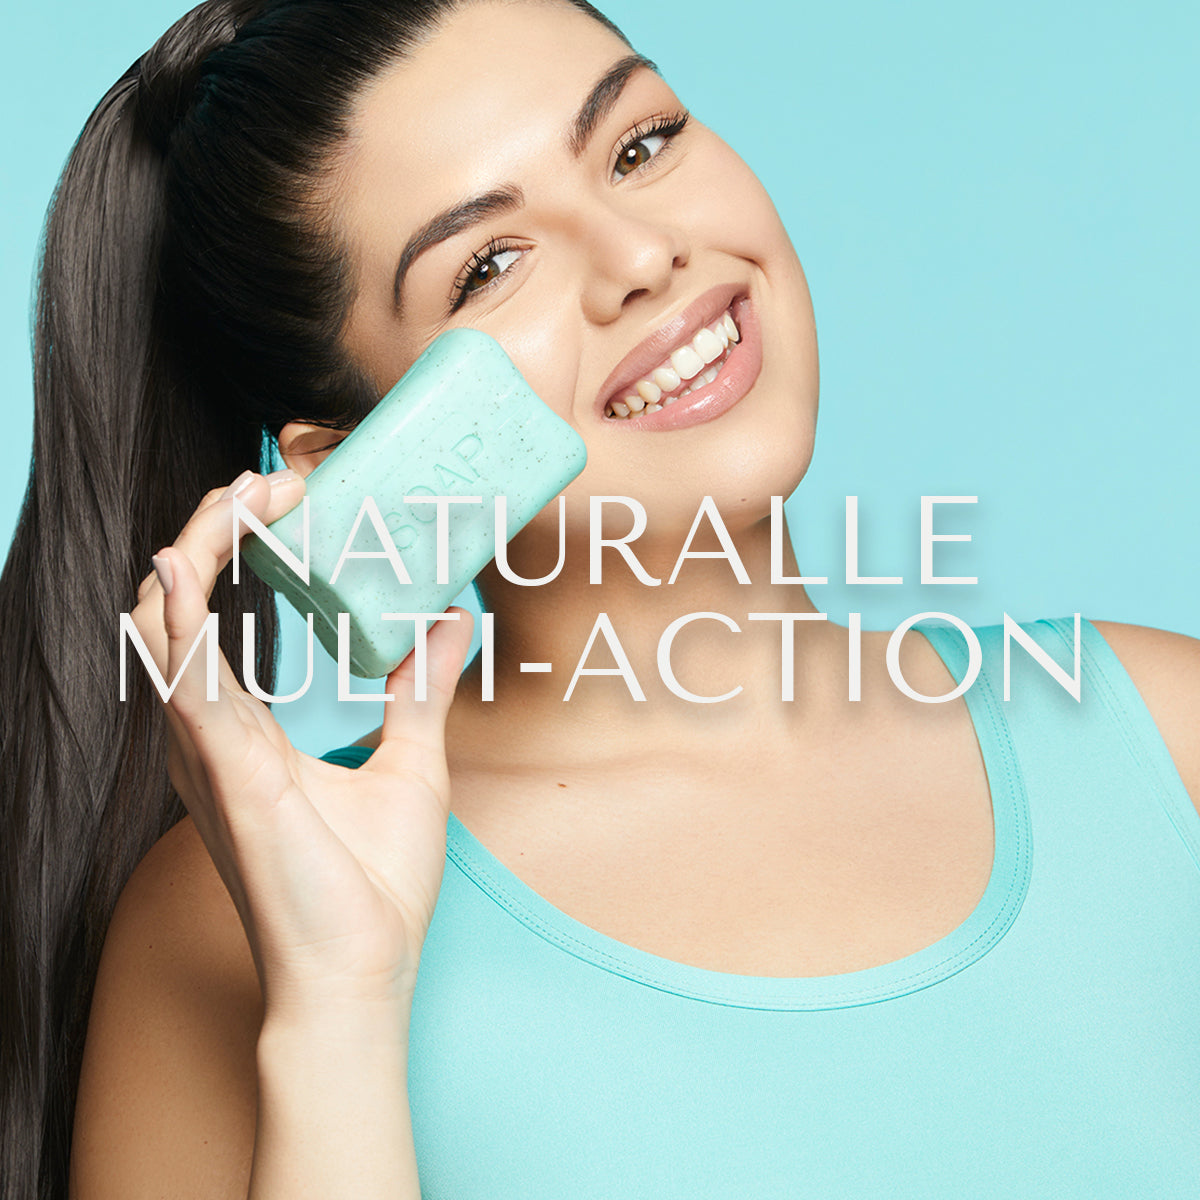 Naturalle Multi-Action